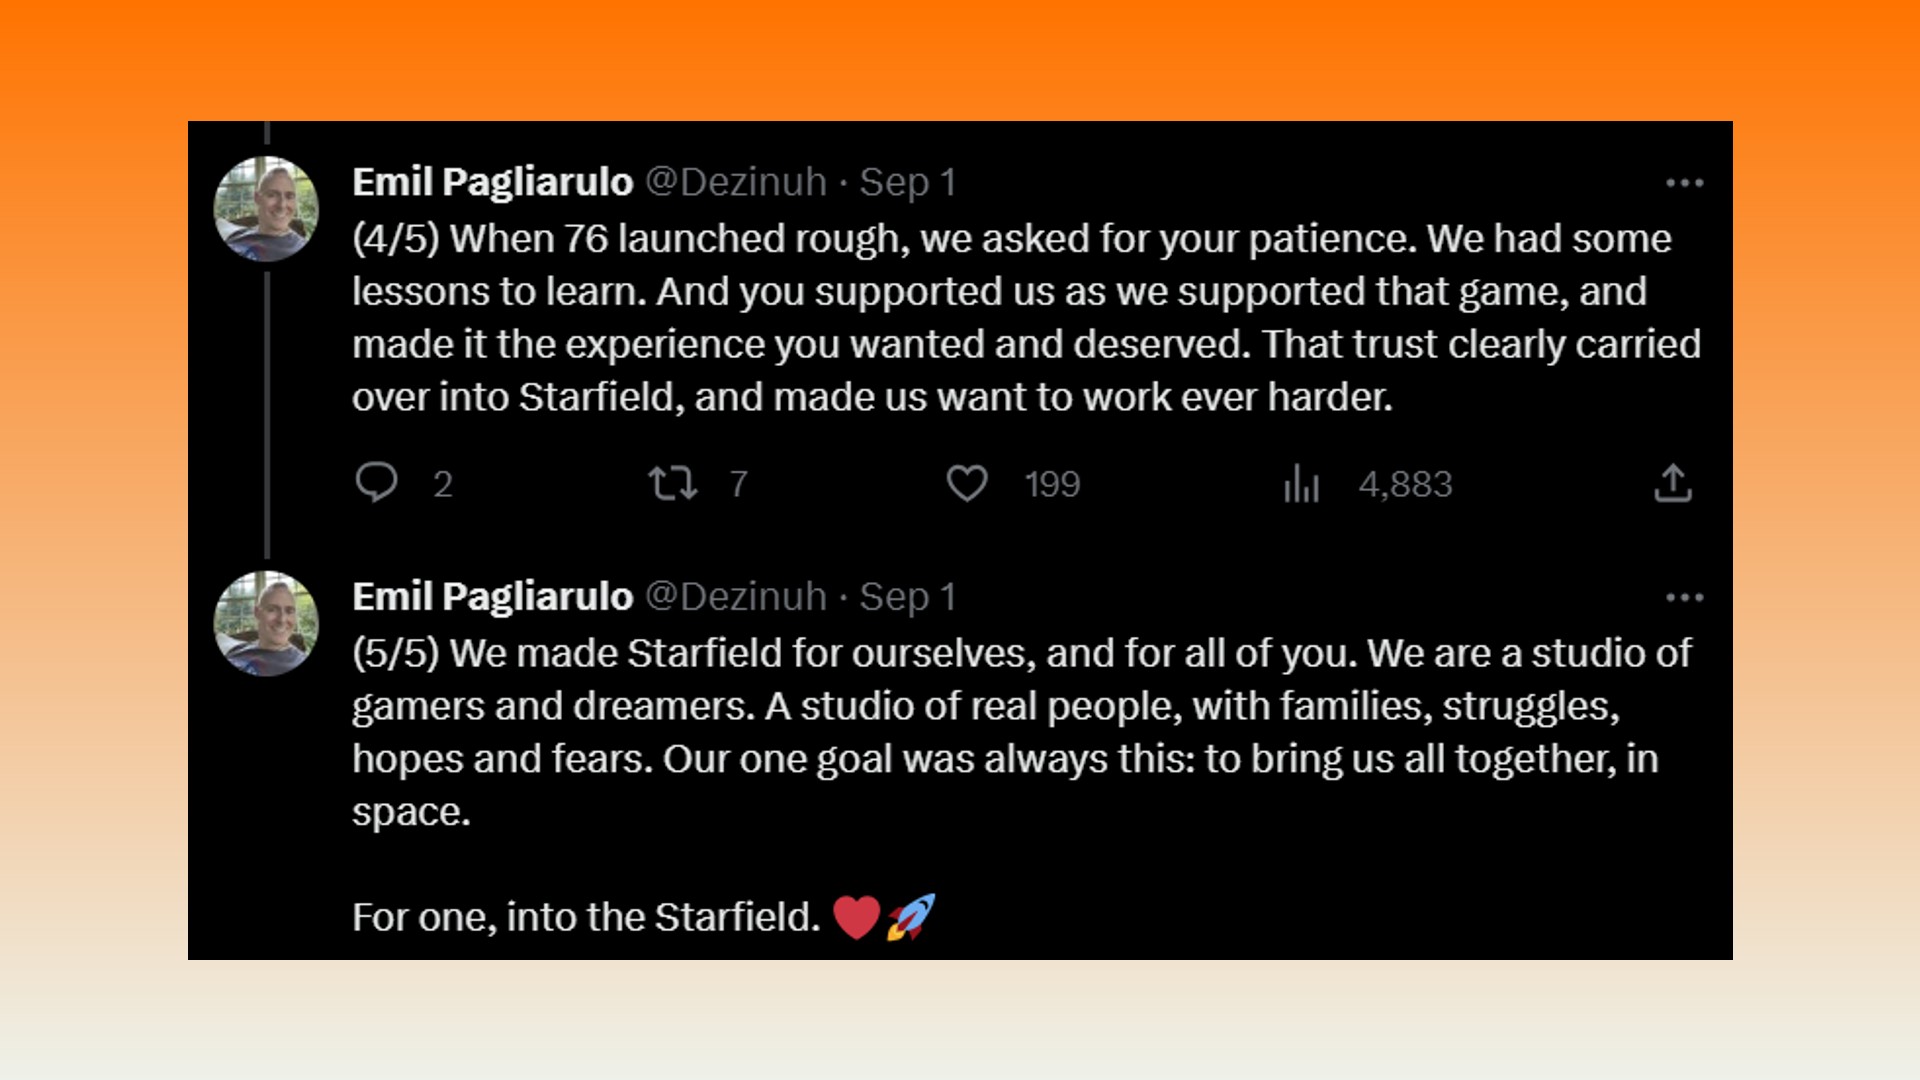 Starfield Fallout 76: A tweet from Skyrim, Fallout, Starfield, and Bethesda RPG game designer Emil Pagliarulo